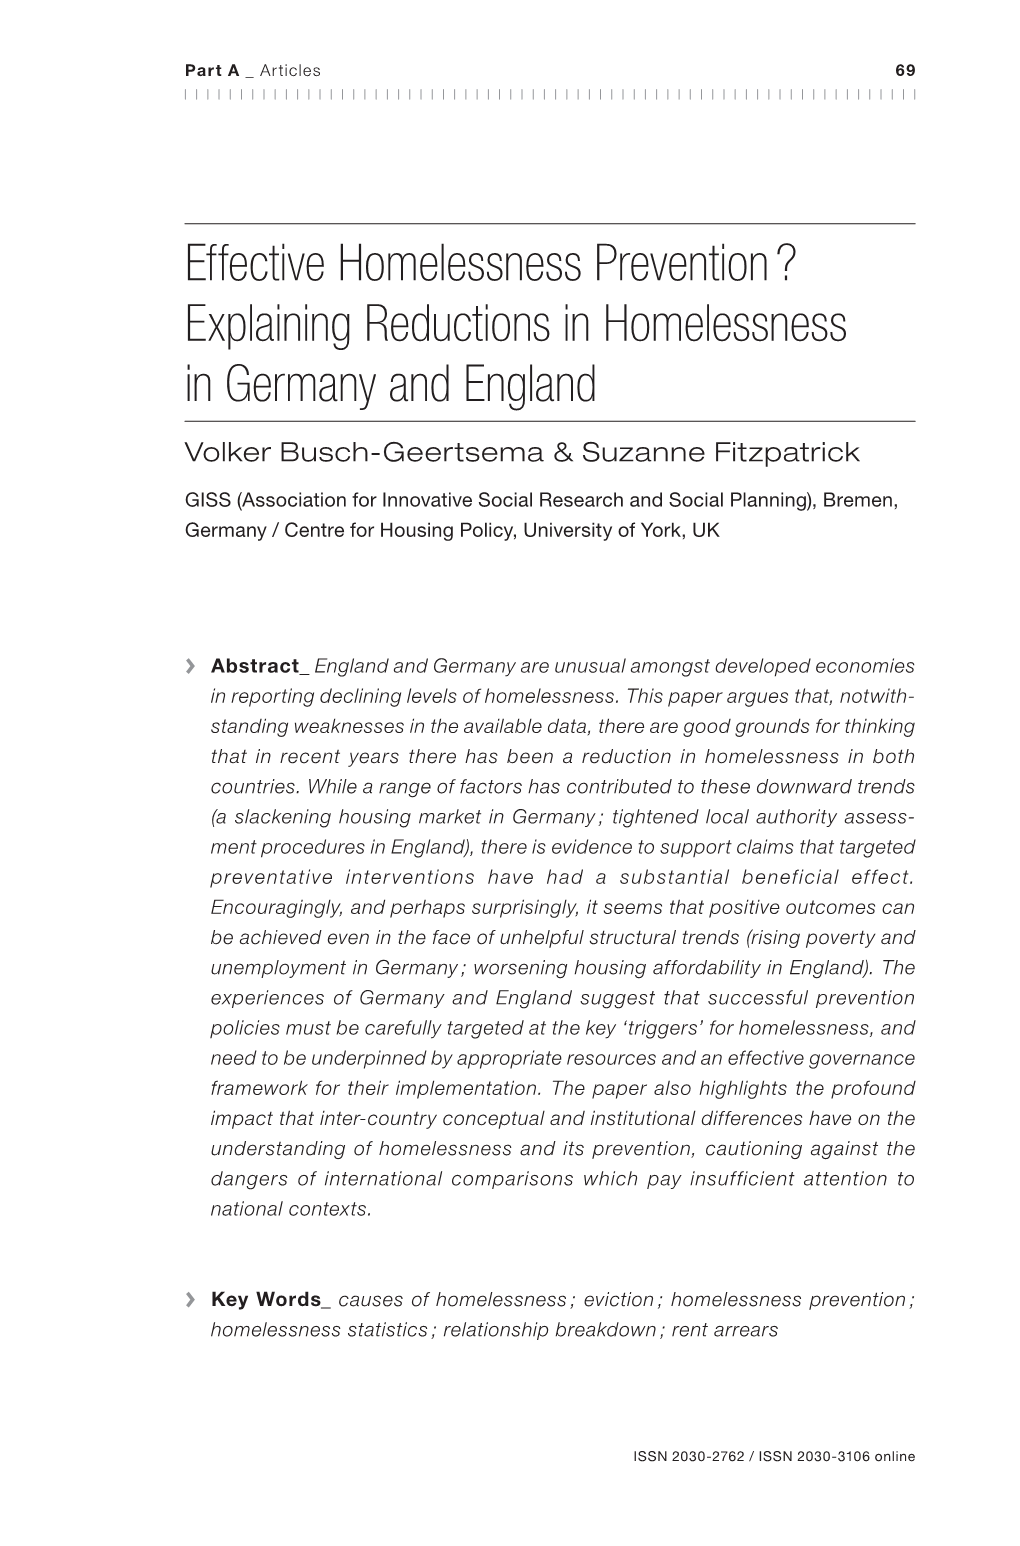 Effective Homelessness Prevention ? Explaining Reductions in Homelessness in Germany and England